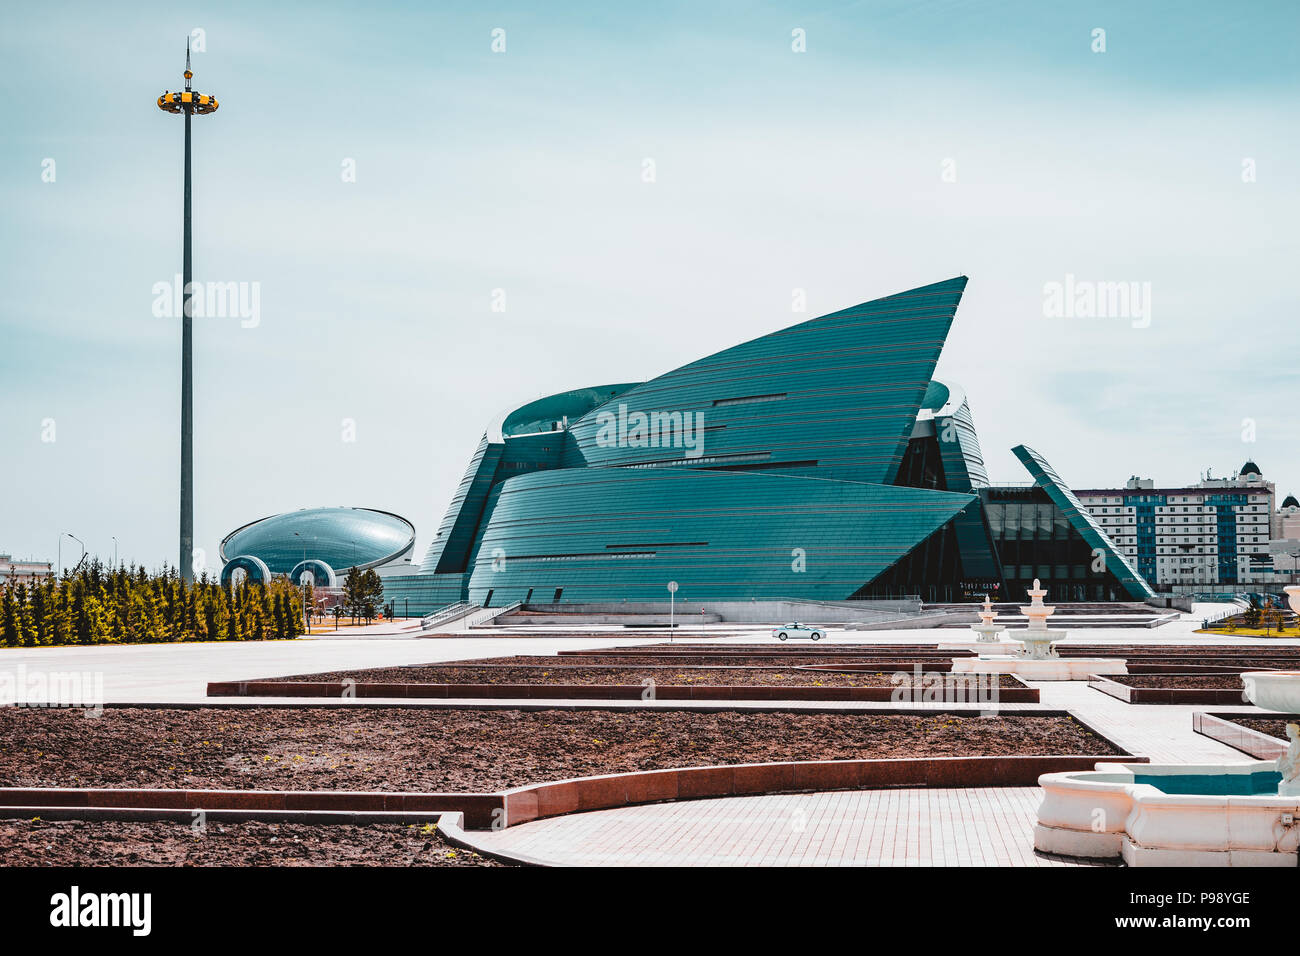 Astana, Kazakhstan - July 2018: located in the administrative center, unique in its architectural design, the biggest concert of the capital structure Stock Photo